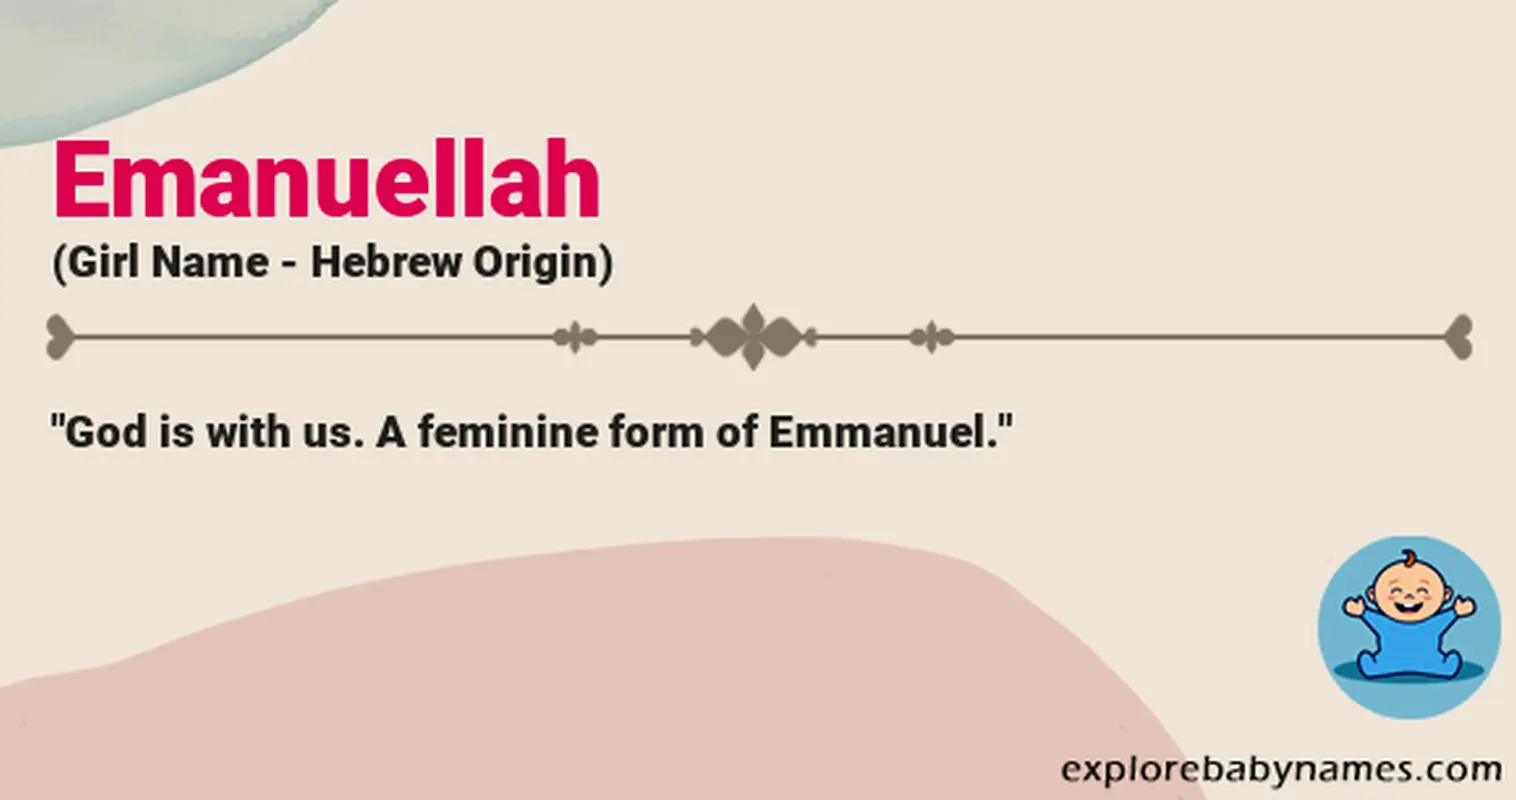 Meaning of Emanuellah